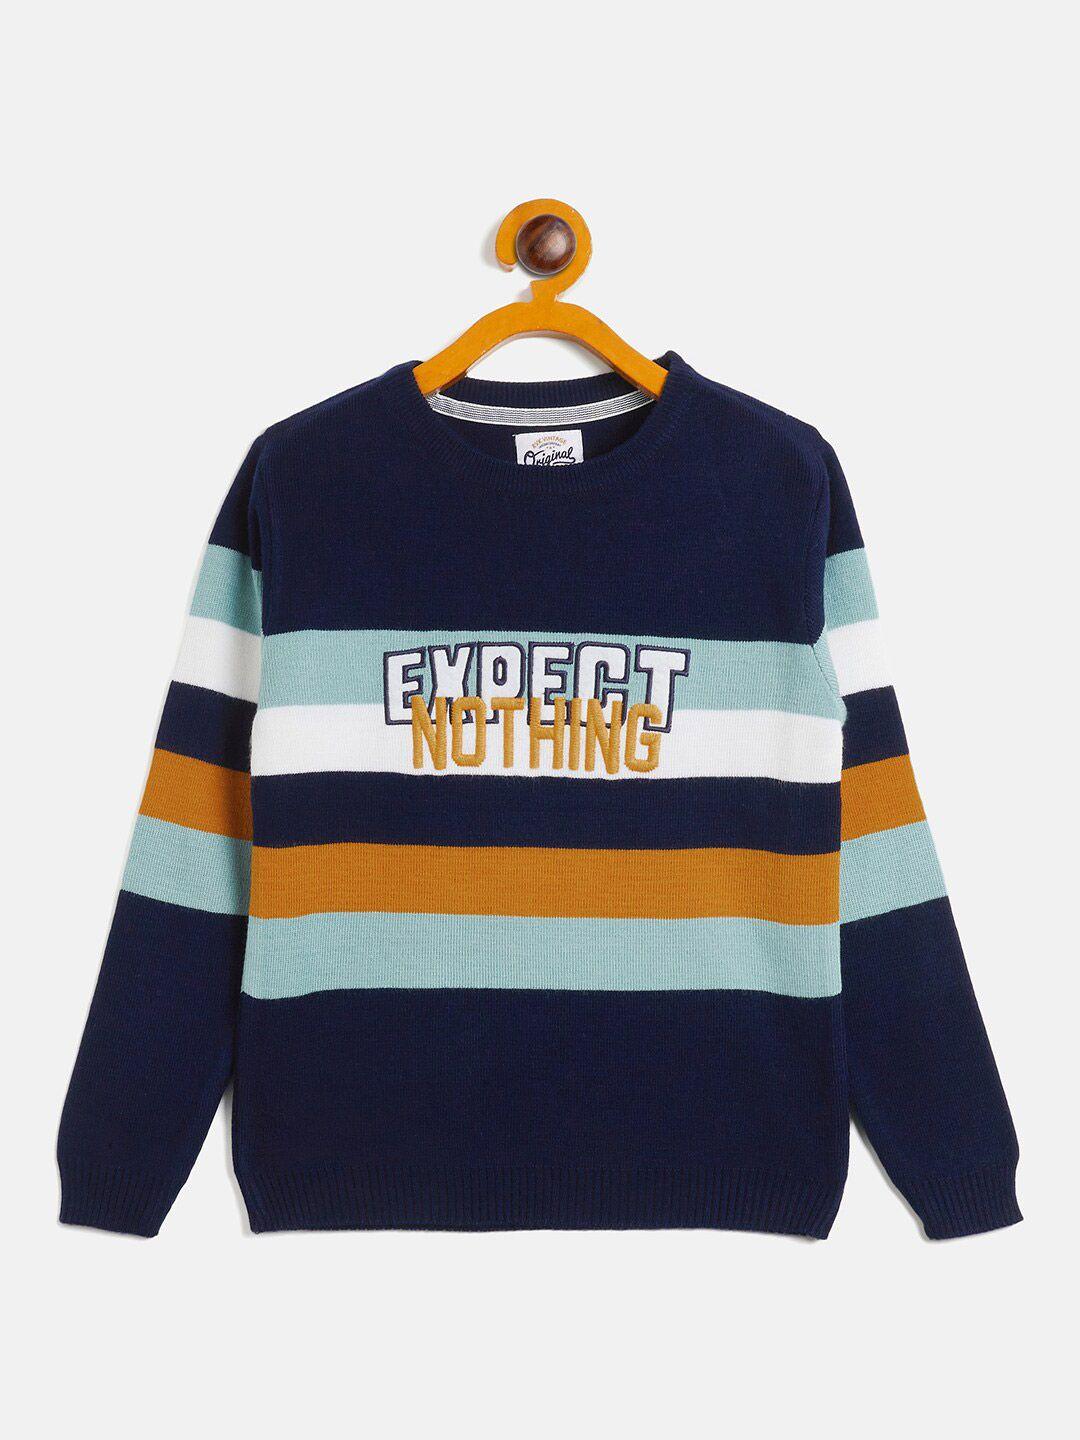 rvk boys striped embroidered acrylic pullover sweater